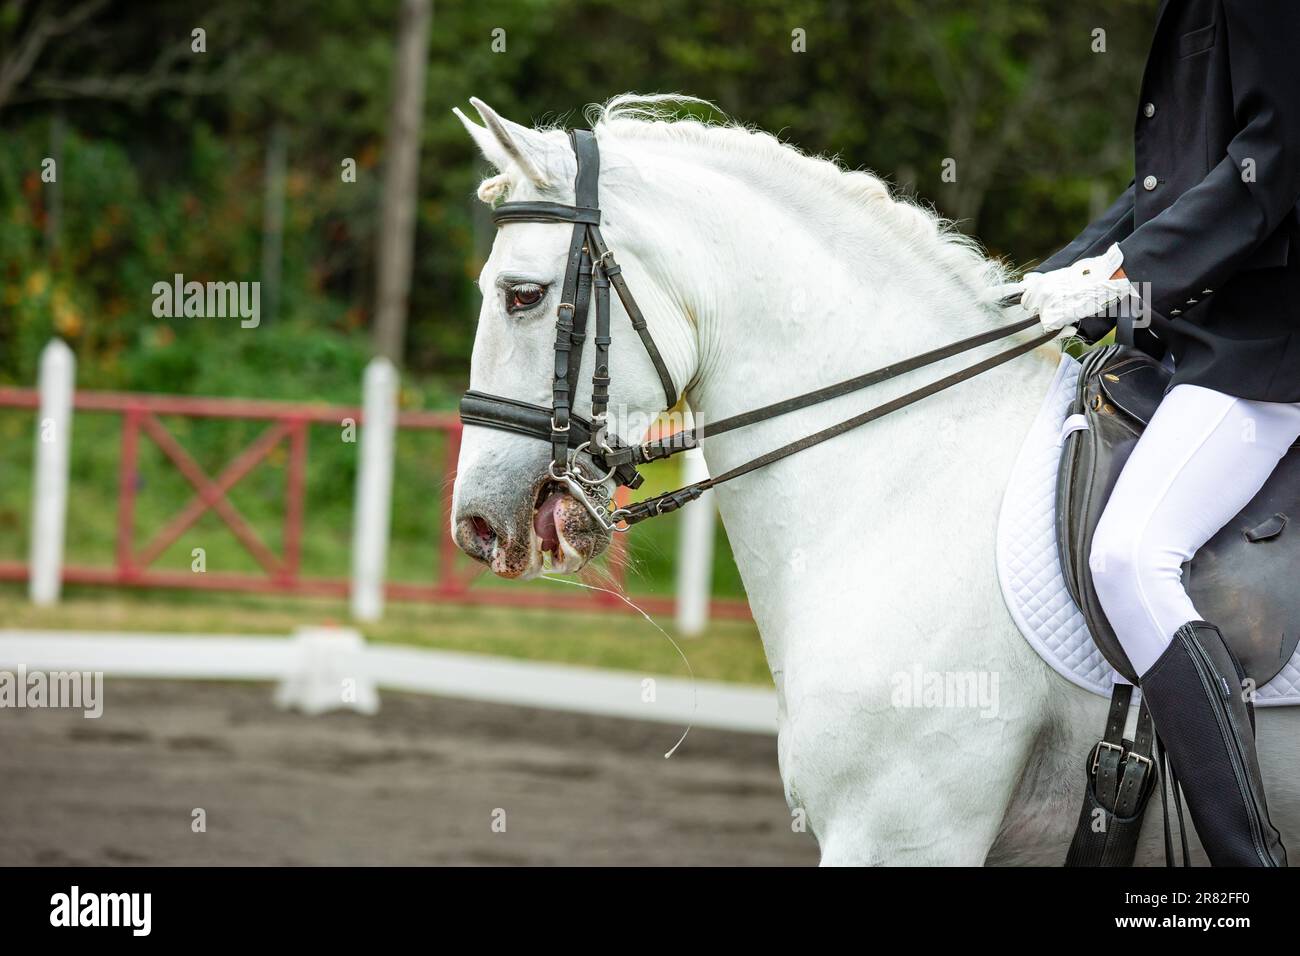 White horse during dressage competition, bridle, saddle and rider. Stock Photo